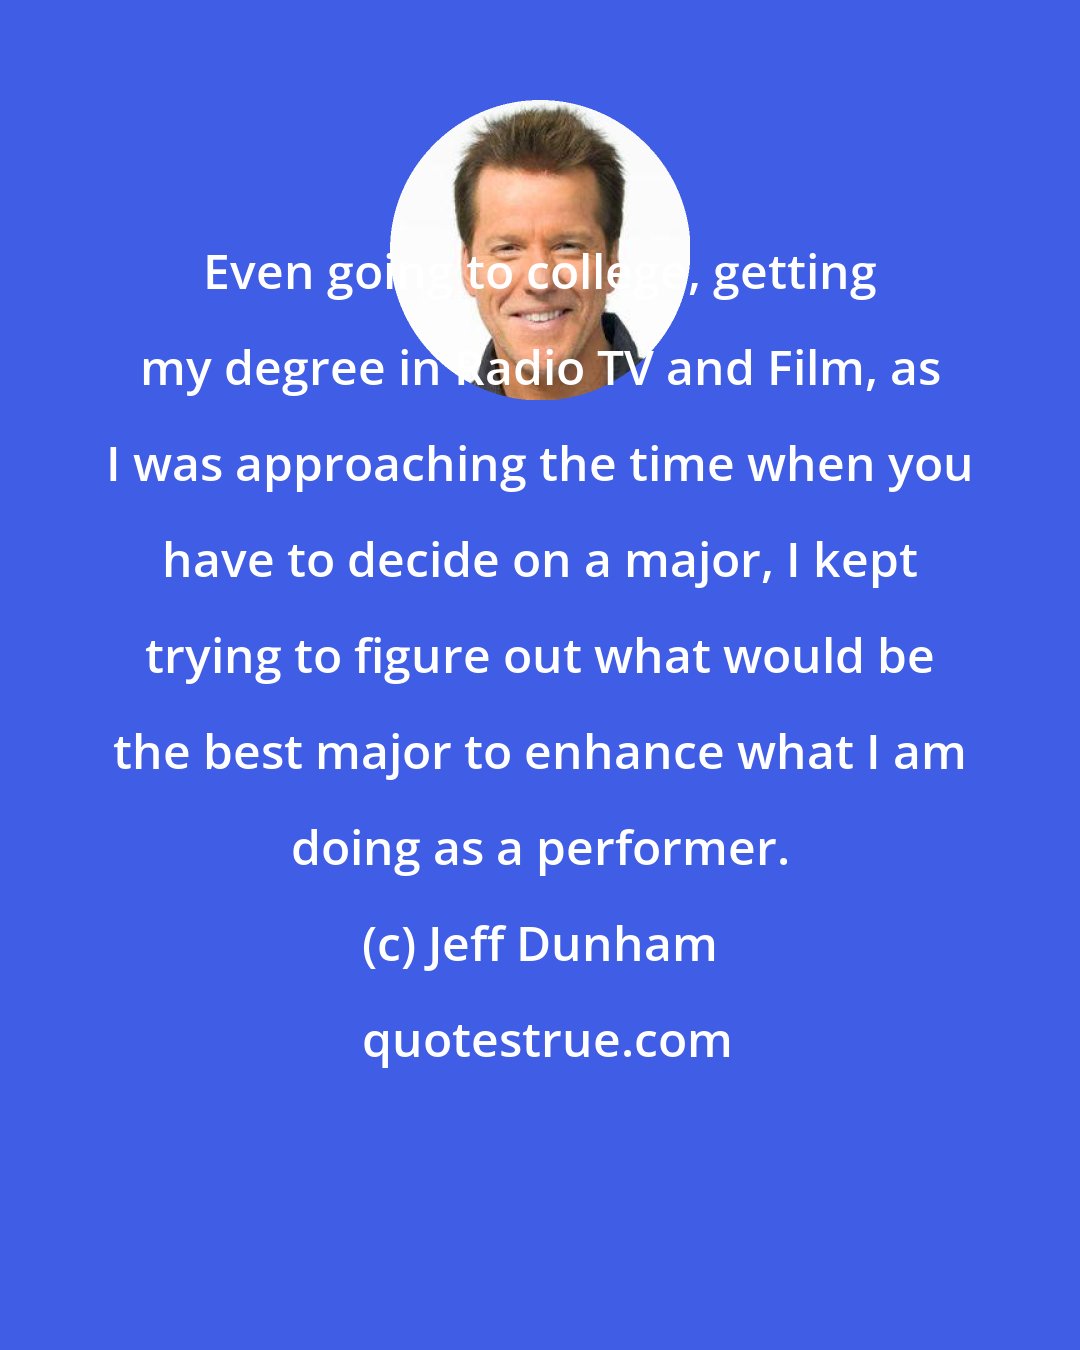 Jeff Dunham: Even going to college, getting my degree in Radio TV and Film, as I was approaching the time when you have to decide on a major, I kept trying to figure out what would be the best major to enhance what I am doing as a performer.